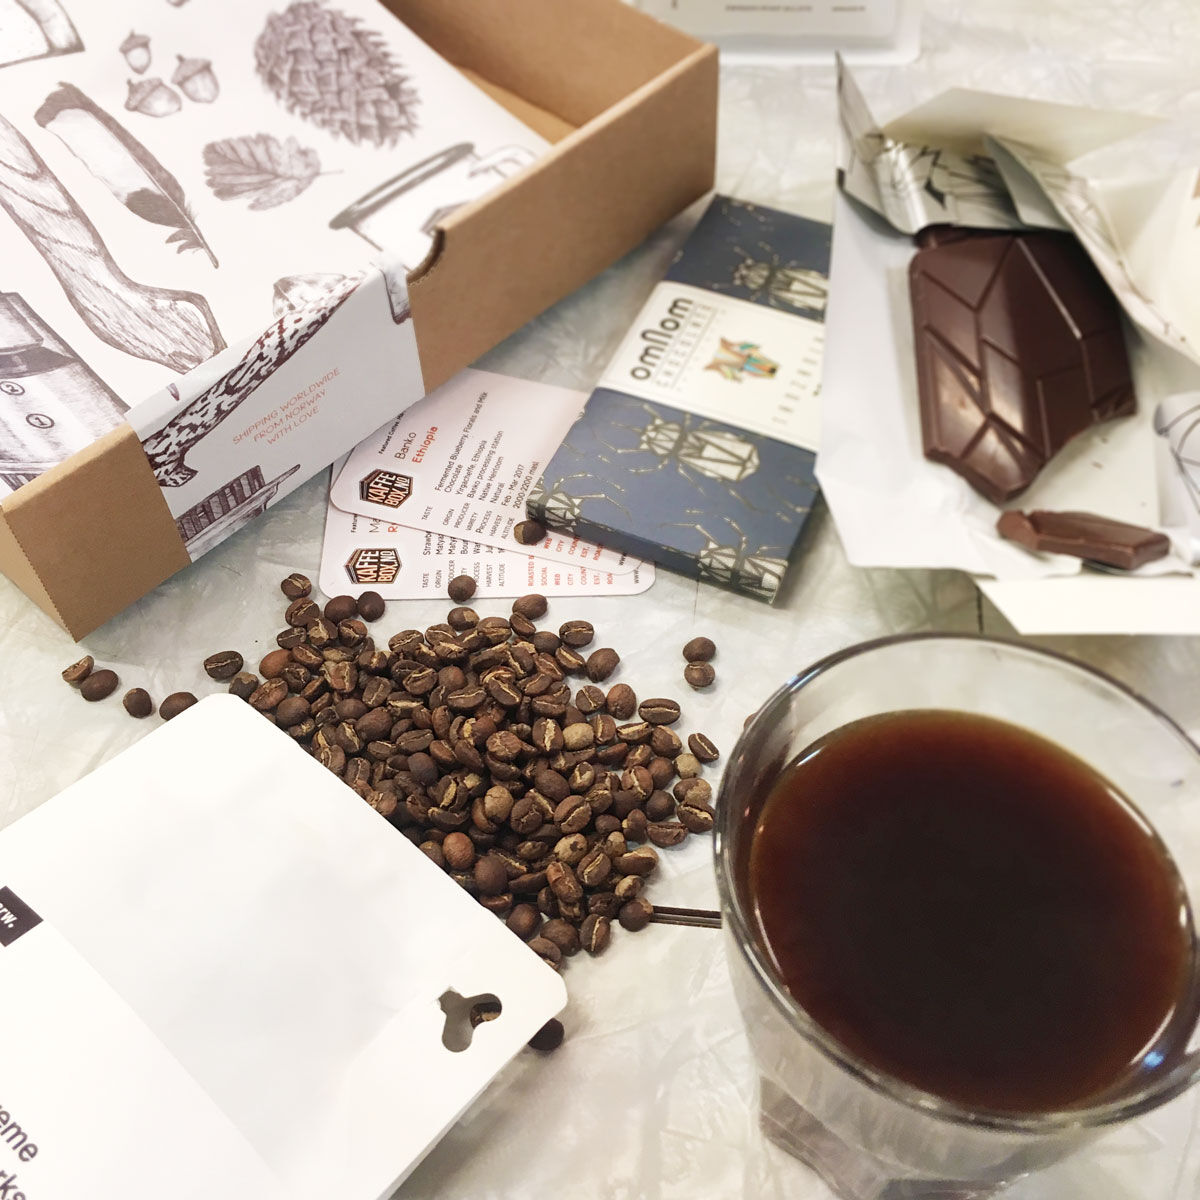 KaffeBox Chocolate Pairing Subscription - No coffee (only chocolate), 3 bars